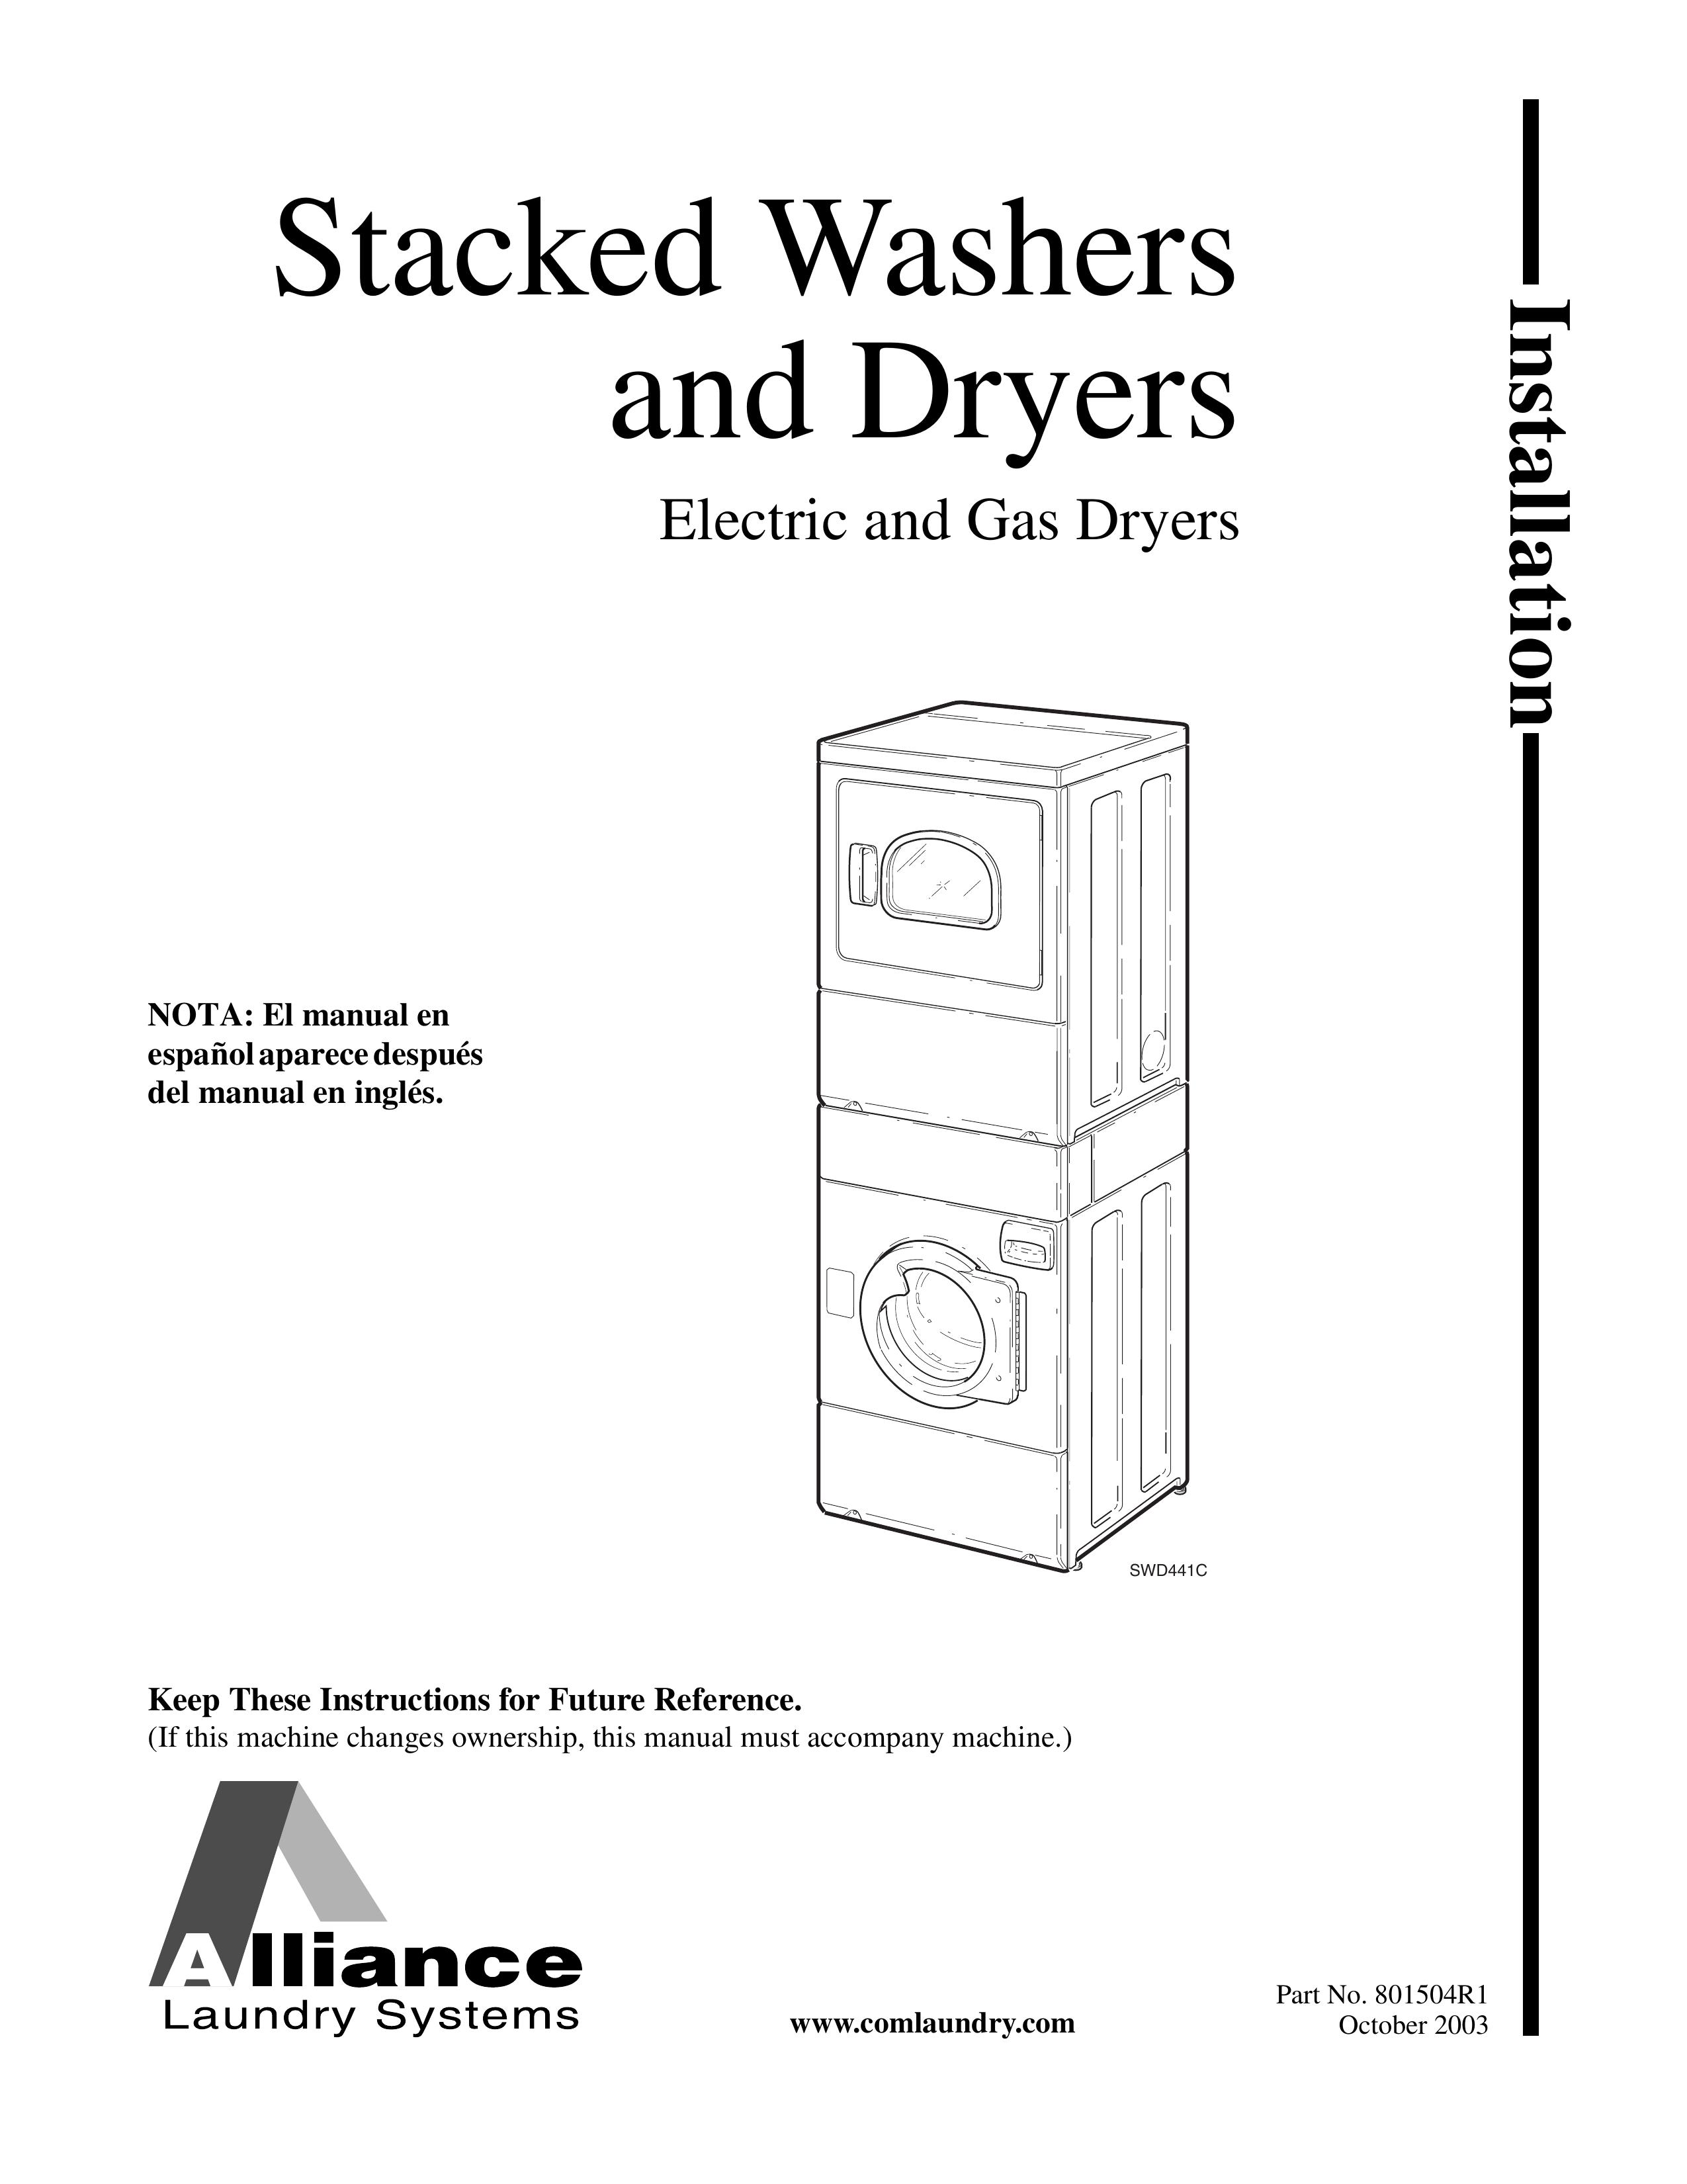 Alliance Laundry Systems Washer/Dryer Washer/Dryer User Manual (Page 1)